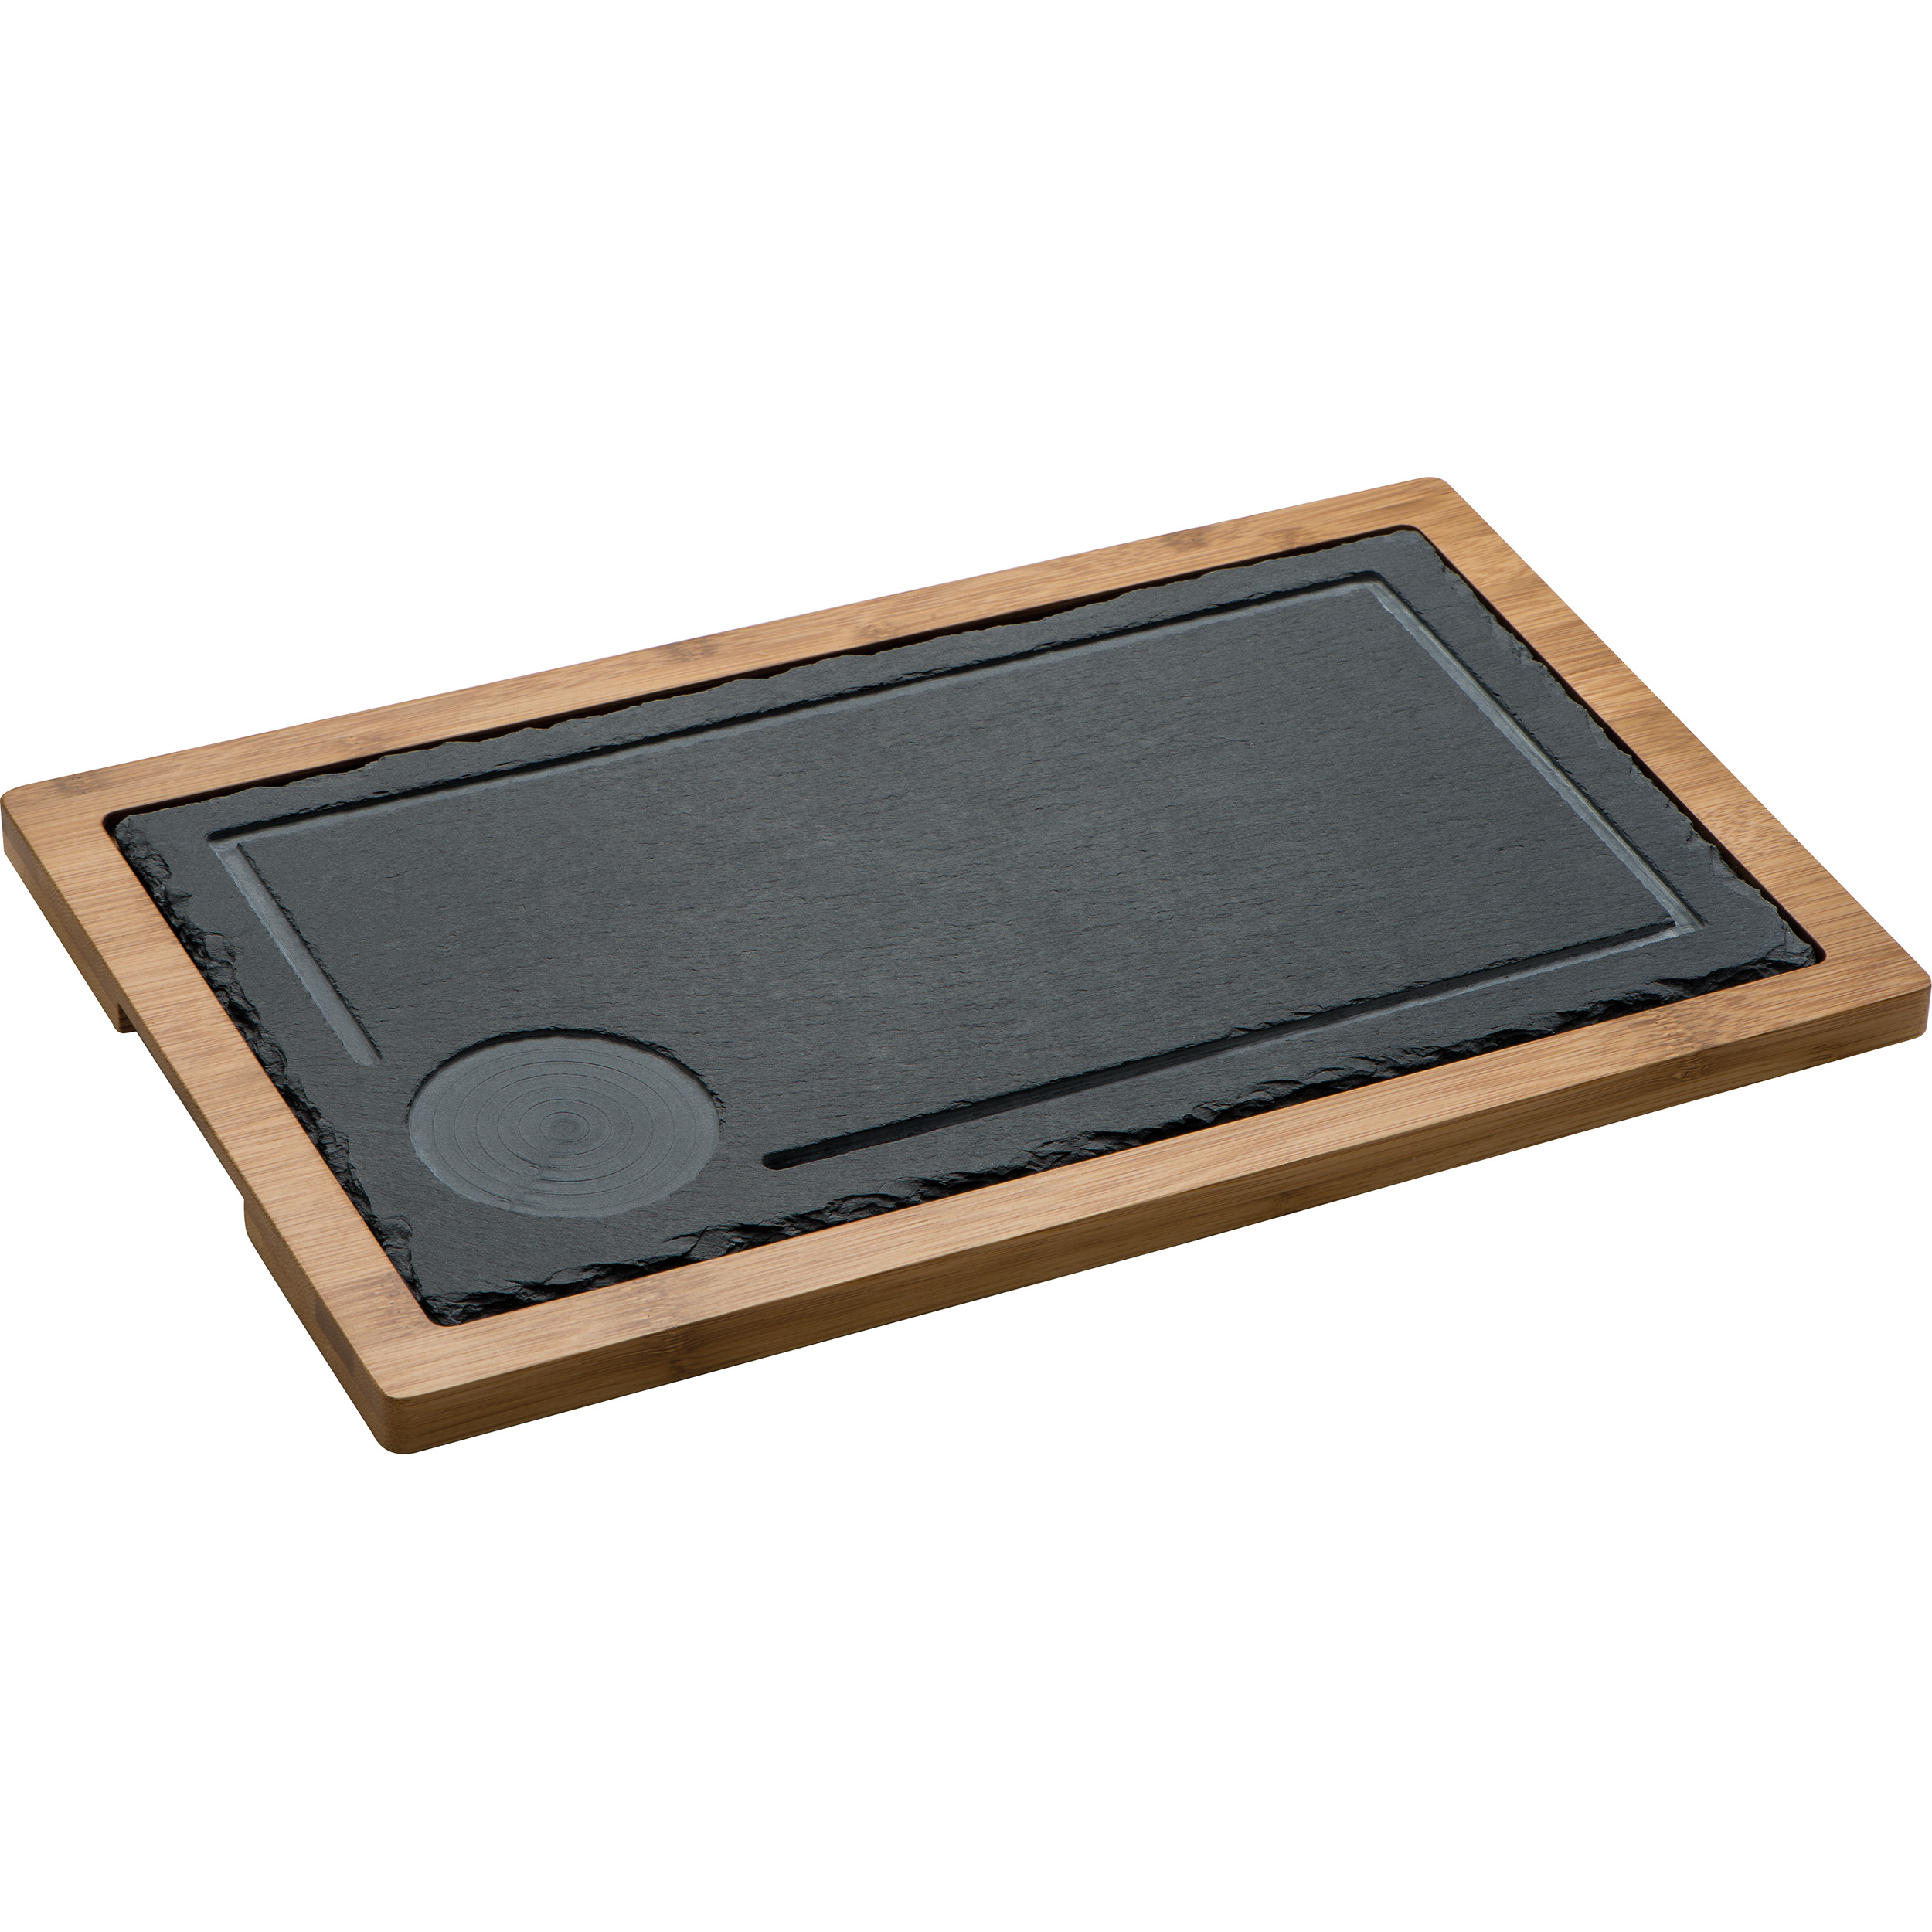 Slate & Bamboo Serving Board - Cawood - Newton-le-Willows